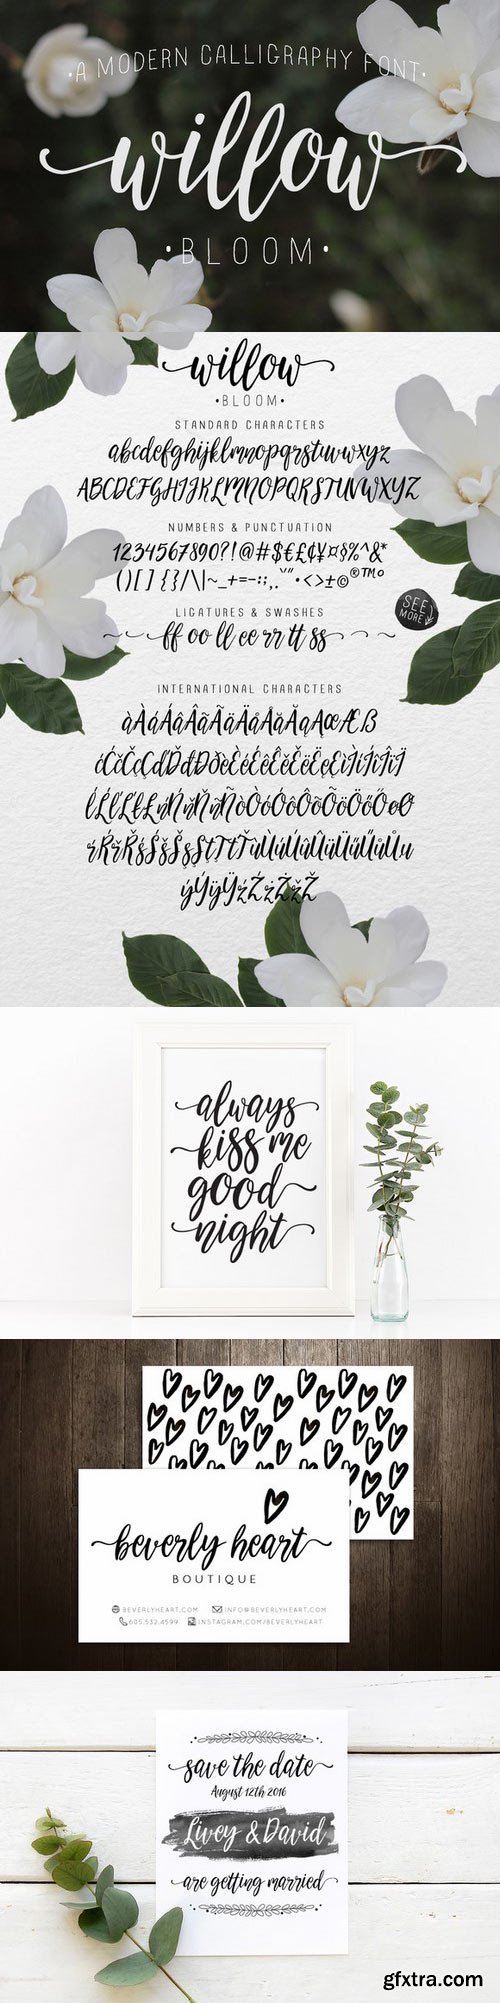 CM - Calligraphy font - Willow Bloom 588287